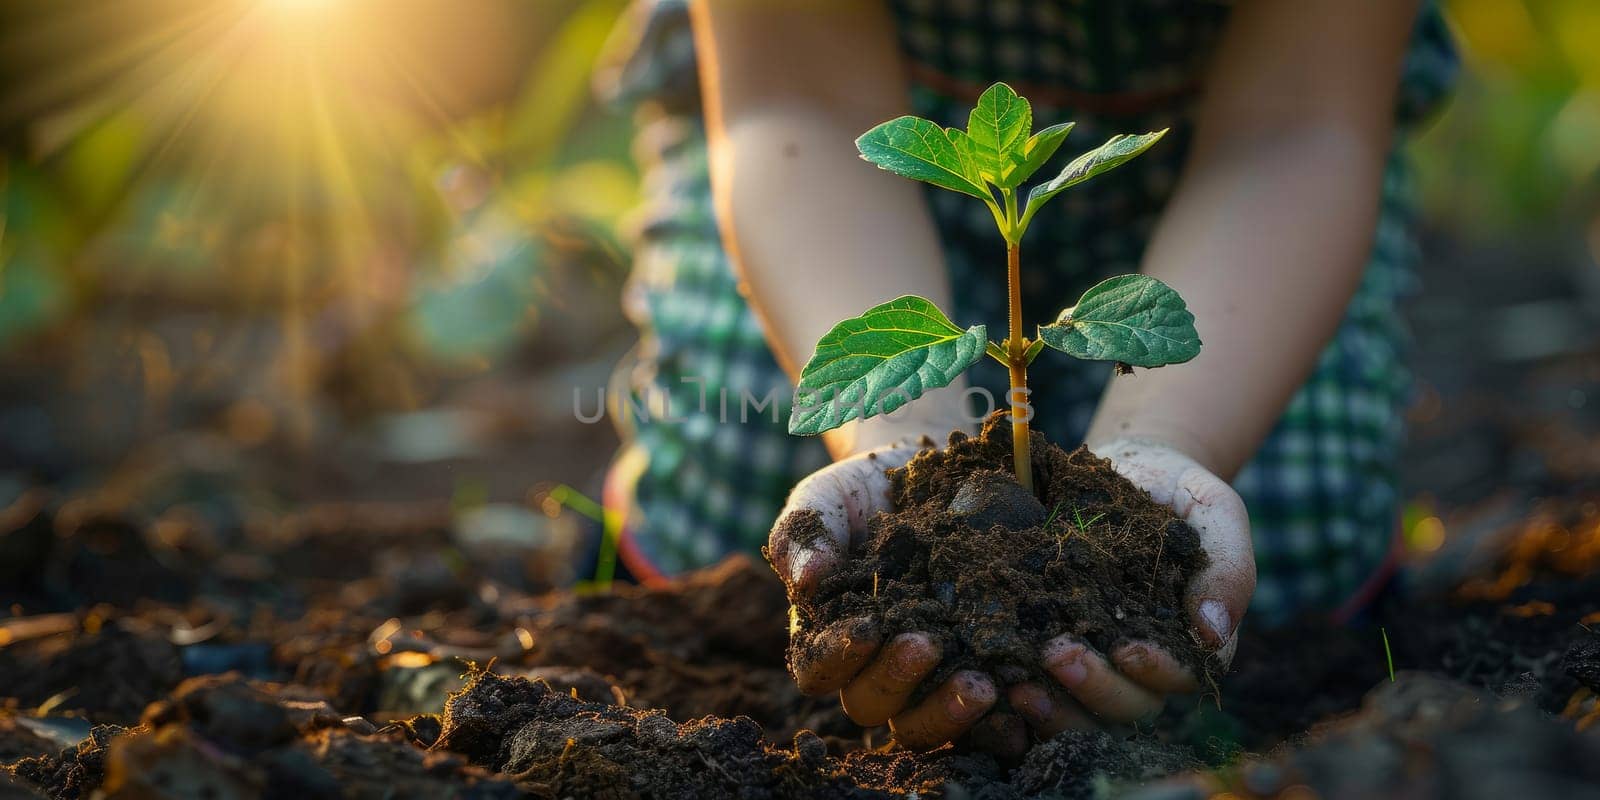 Close up of childs hands holding and planting a small green seedling in soil with warm sunlight in the background. Concept of new life, growth, and environmental conservation.